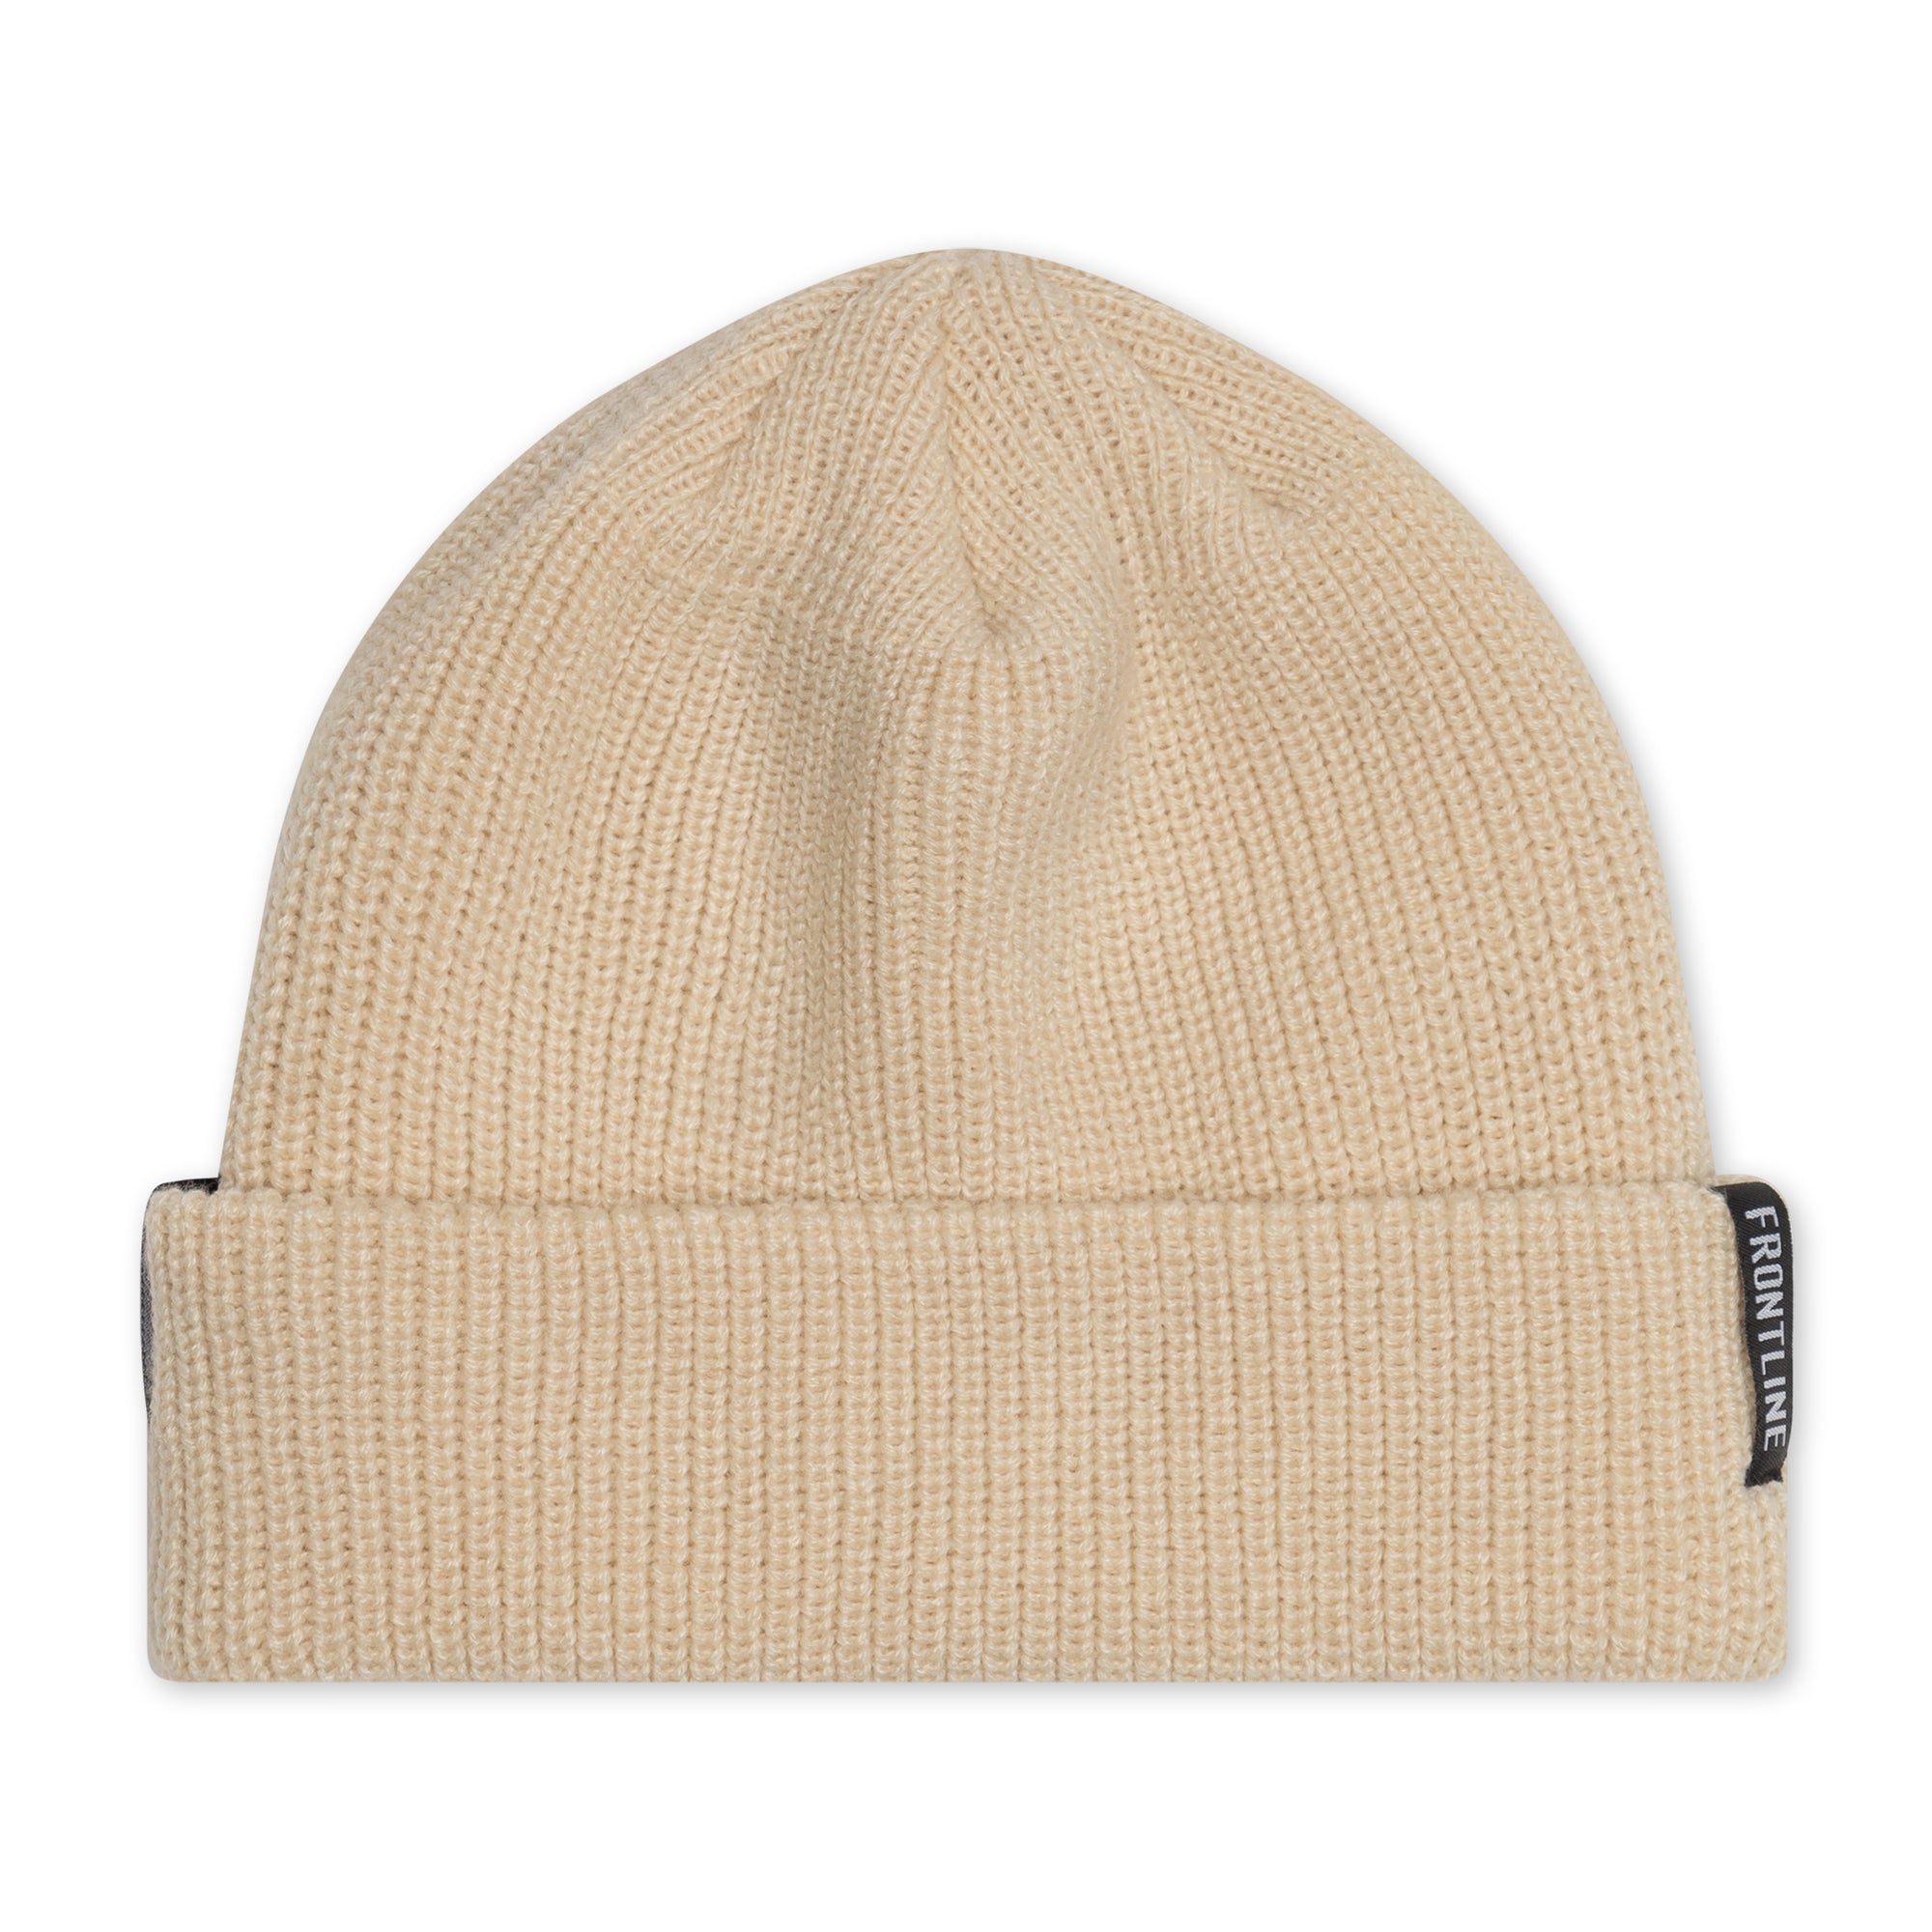 Toasty Times Fleece Lined Beanie In Iced Latte • Impressions Online Boutique